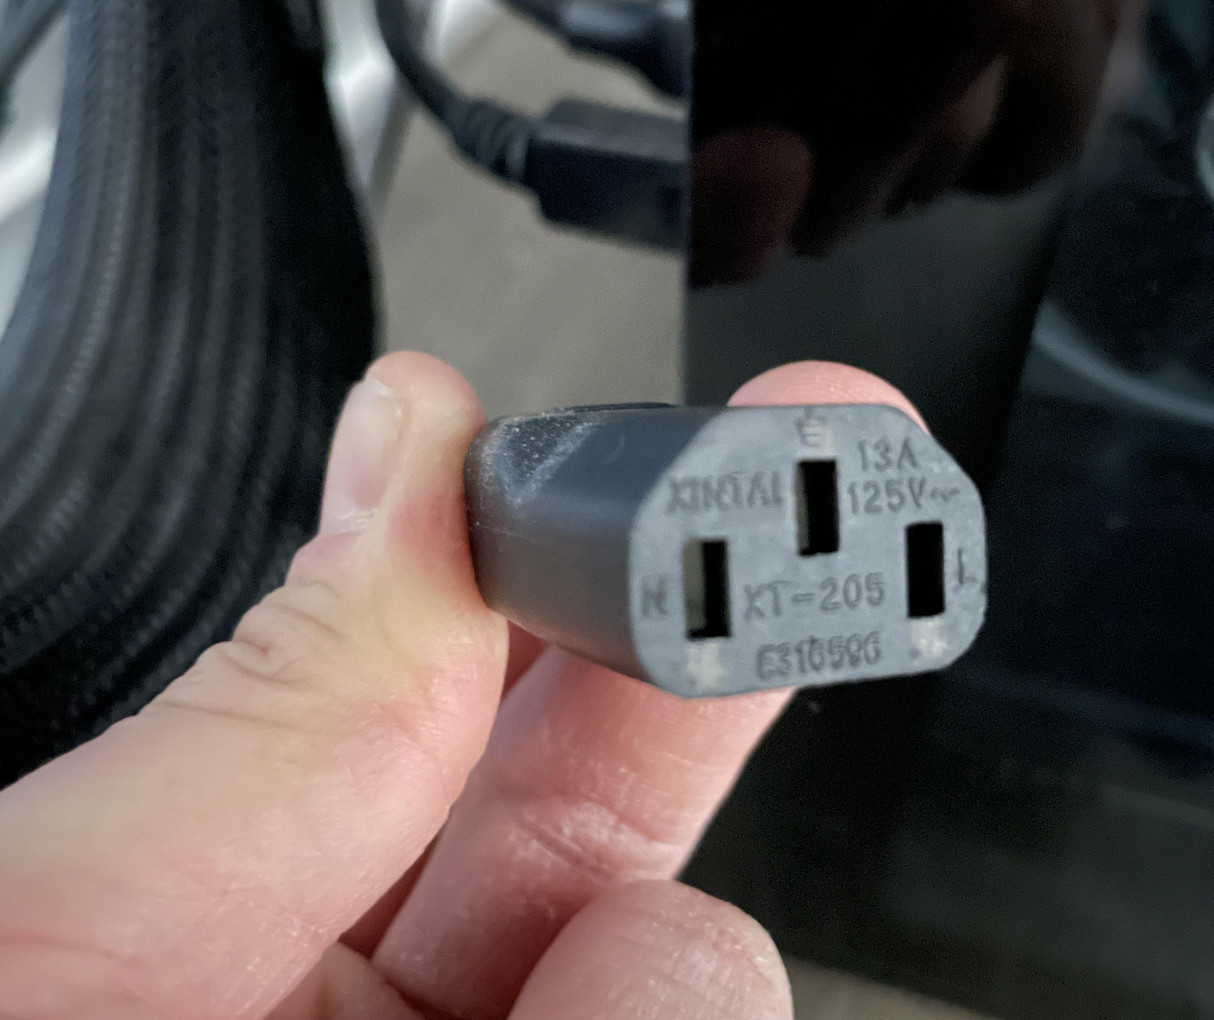 Unplug the PC's Power Cable